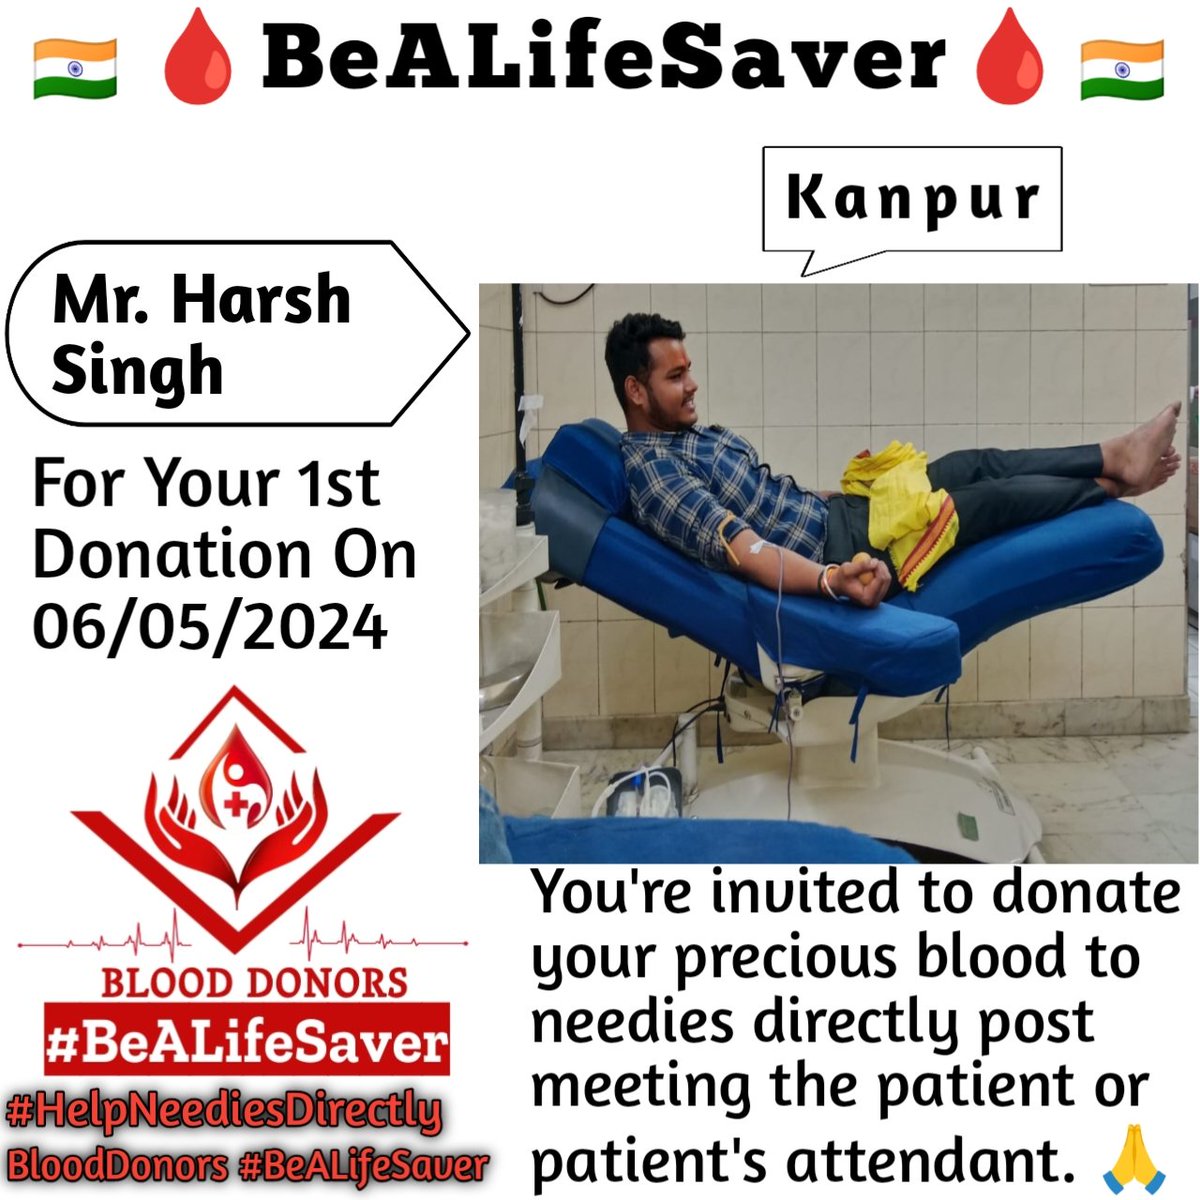 🙏 Congratulations Debutant 🙏
Kanpur BeALifeSaver
Kudos_Mr_Harsh_Singh_Ji

Today's hero
Mr. Harsh_Singh Ji donated blood in Kanpur for the 1st Time for one of the needies. Heartfelt Gratitude and Respect to Harsh Singh Ji for his blood donation for Patient admitted in Kanpur.